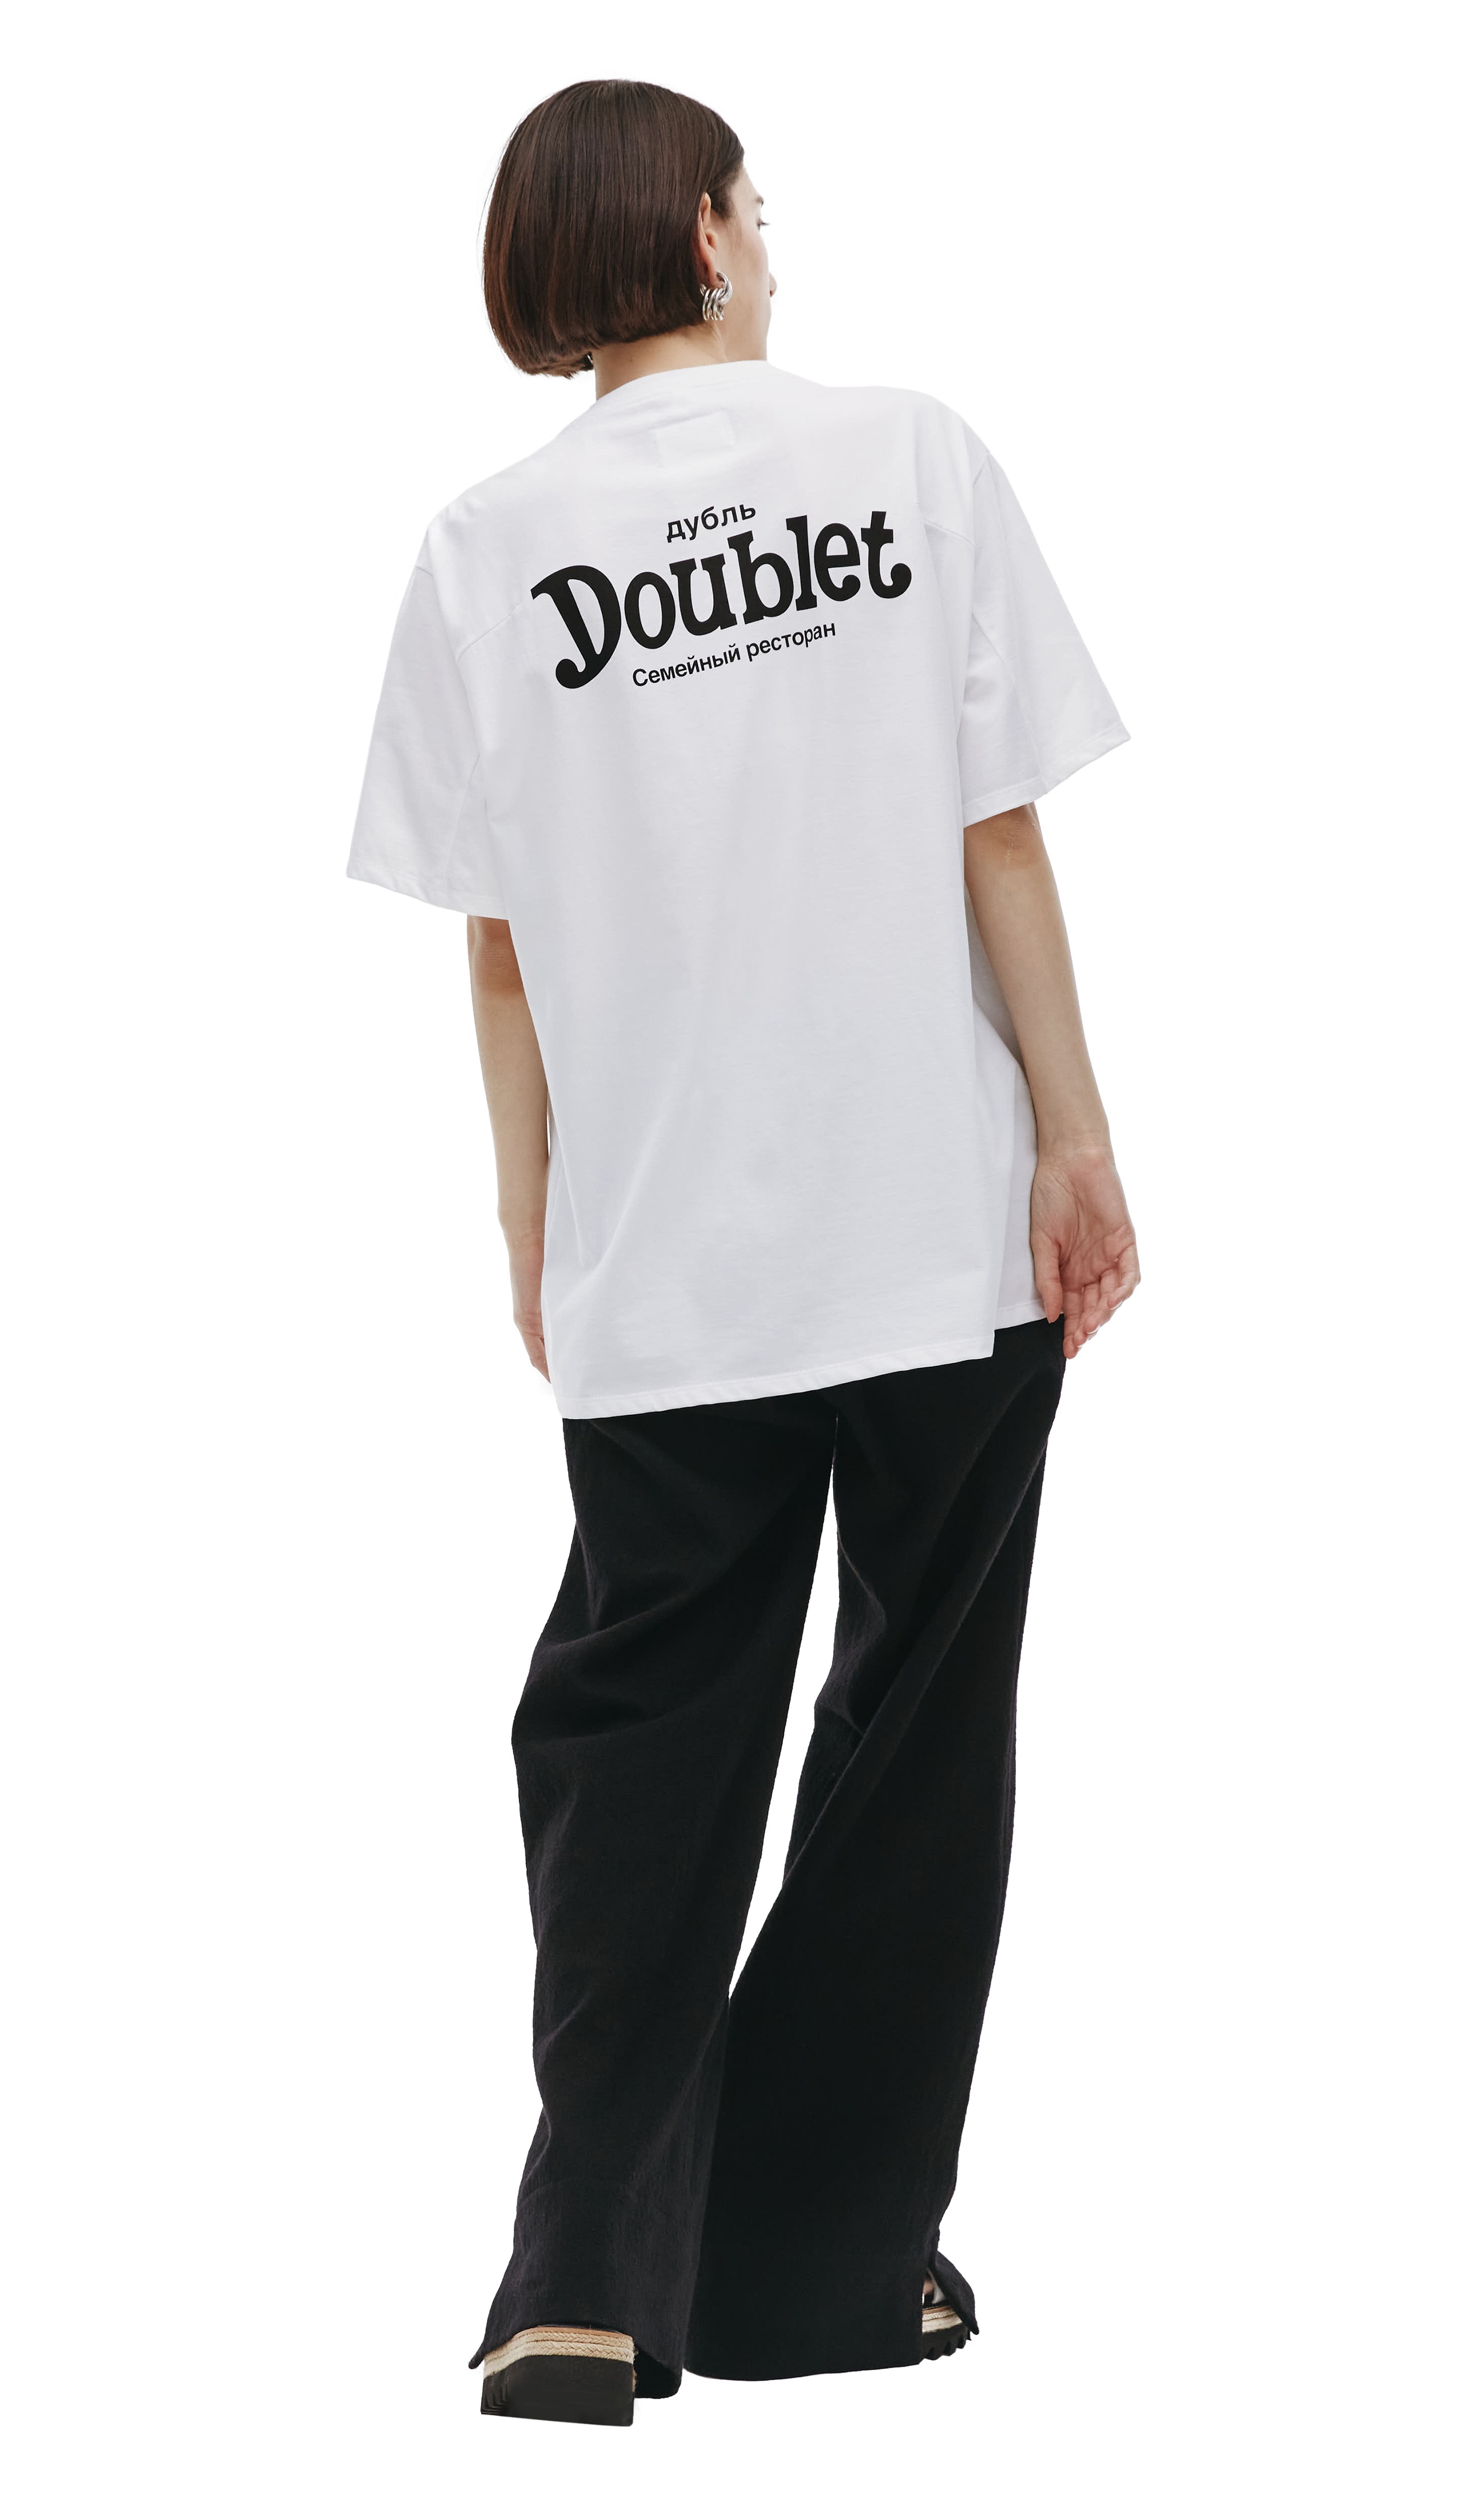 DOUBLET X SVMOSCOW T-SHIRT - 3